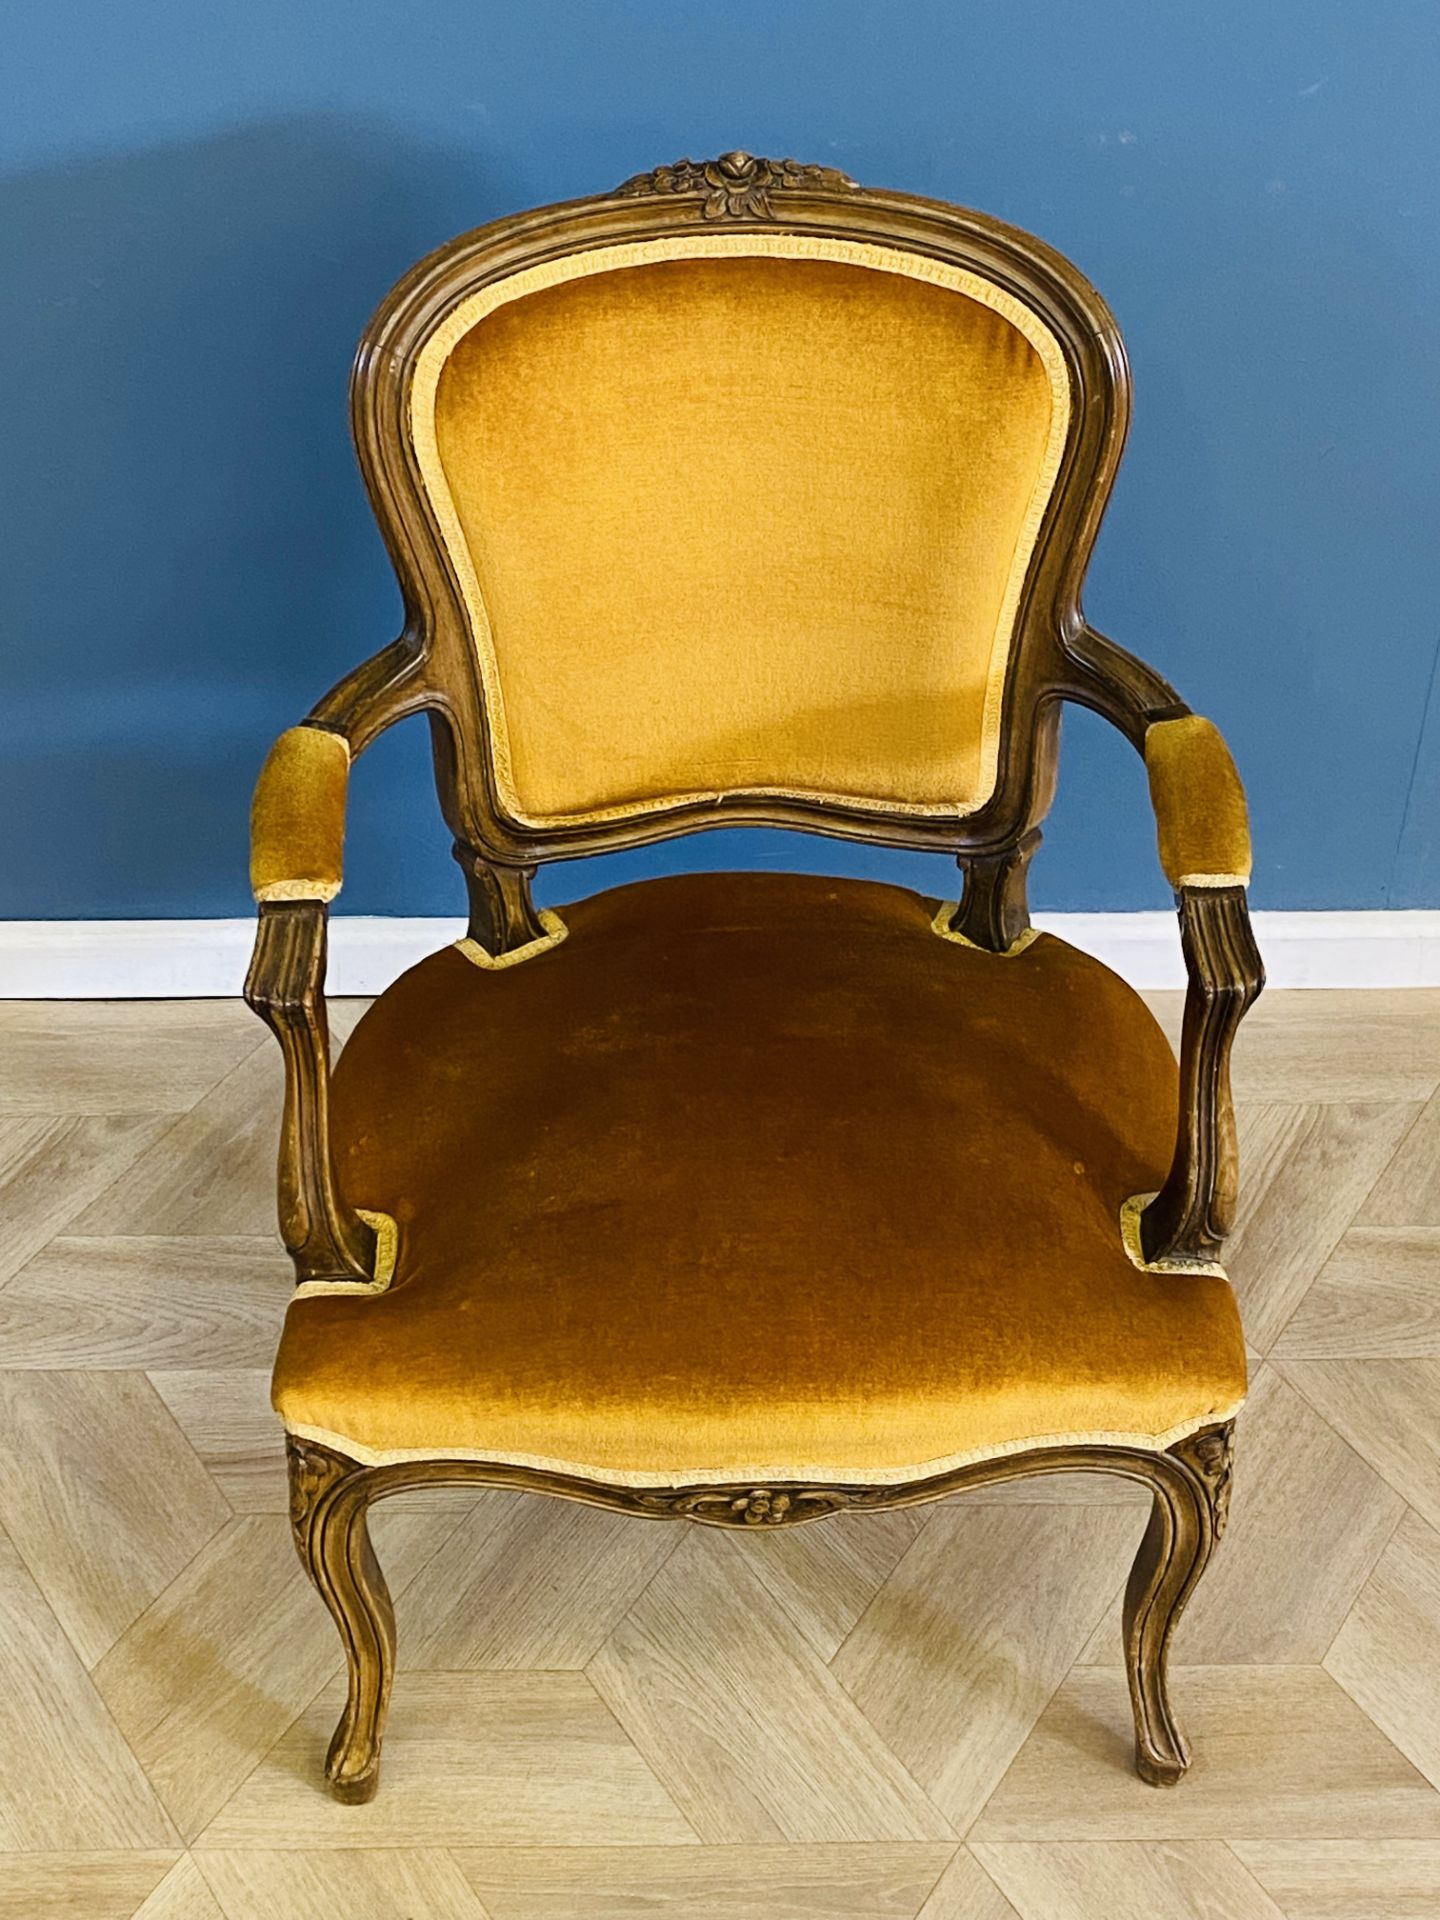 Pair of French style elbow chairs - Image 7 of 8